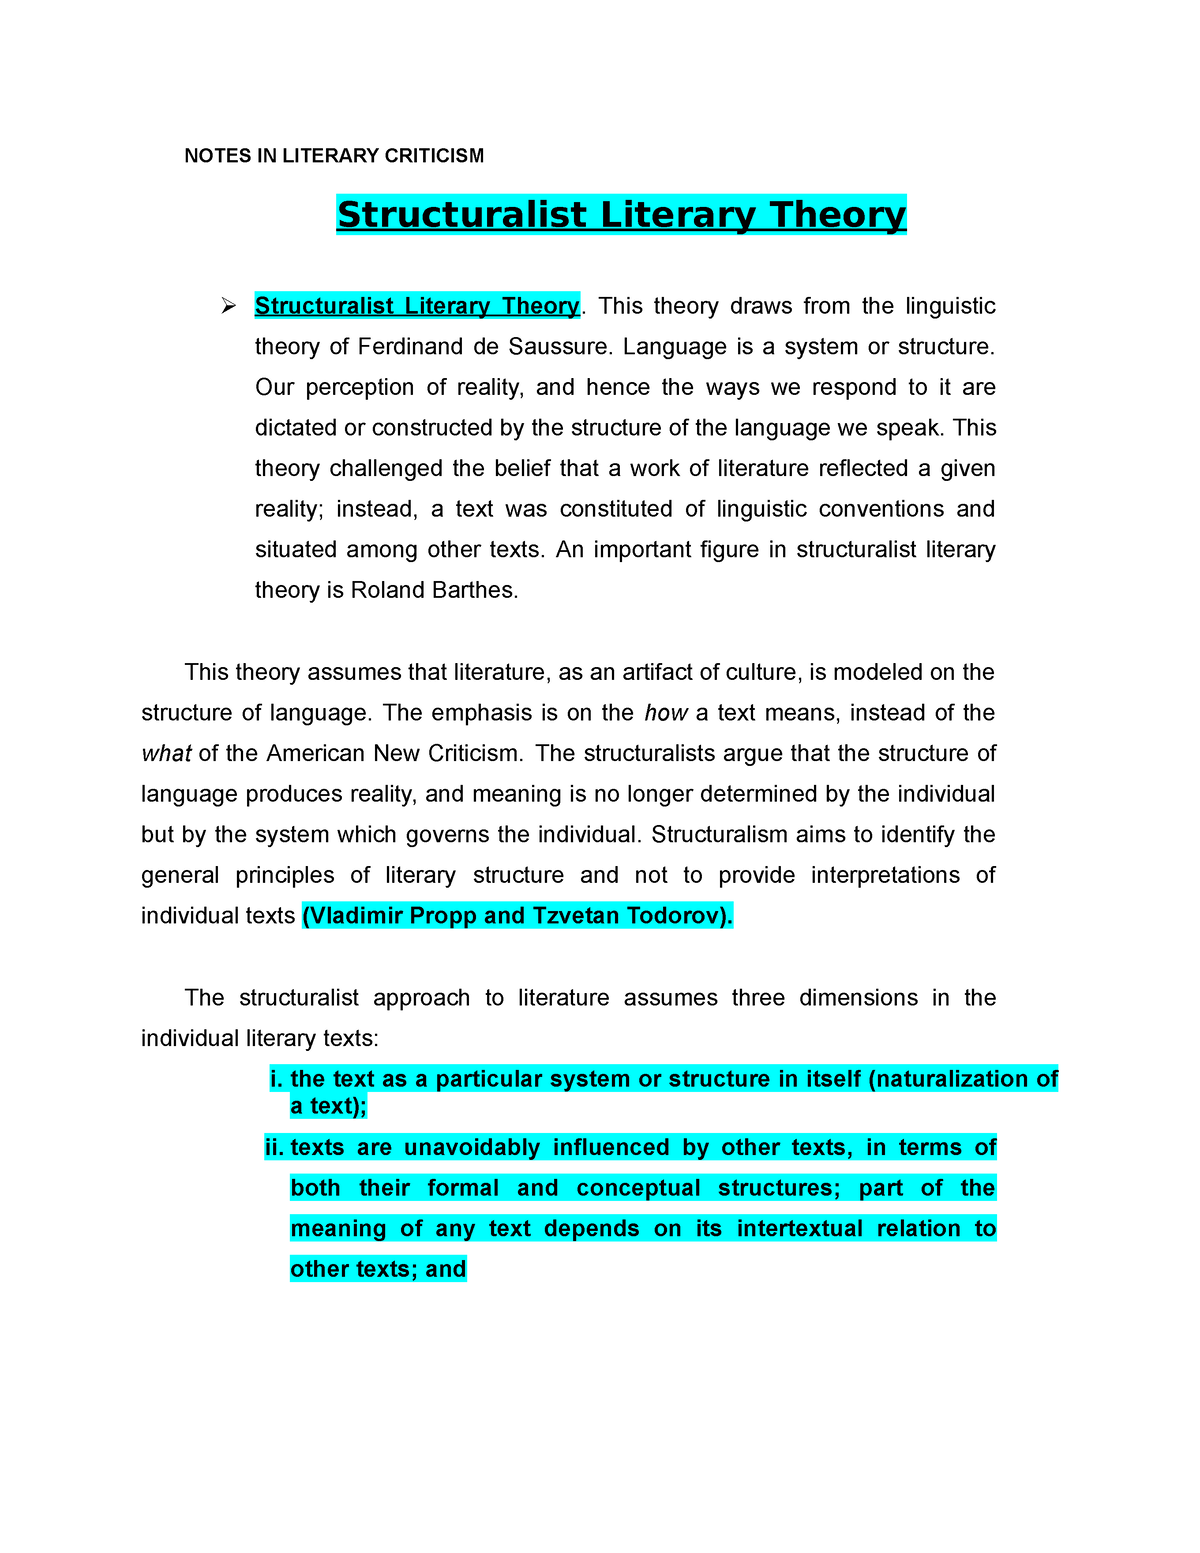 structuralism in literary theory essay